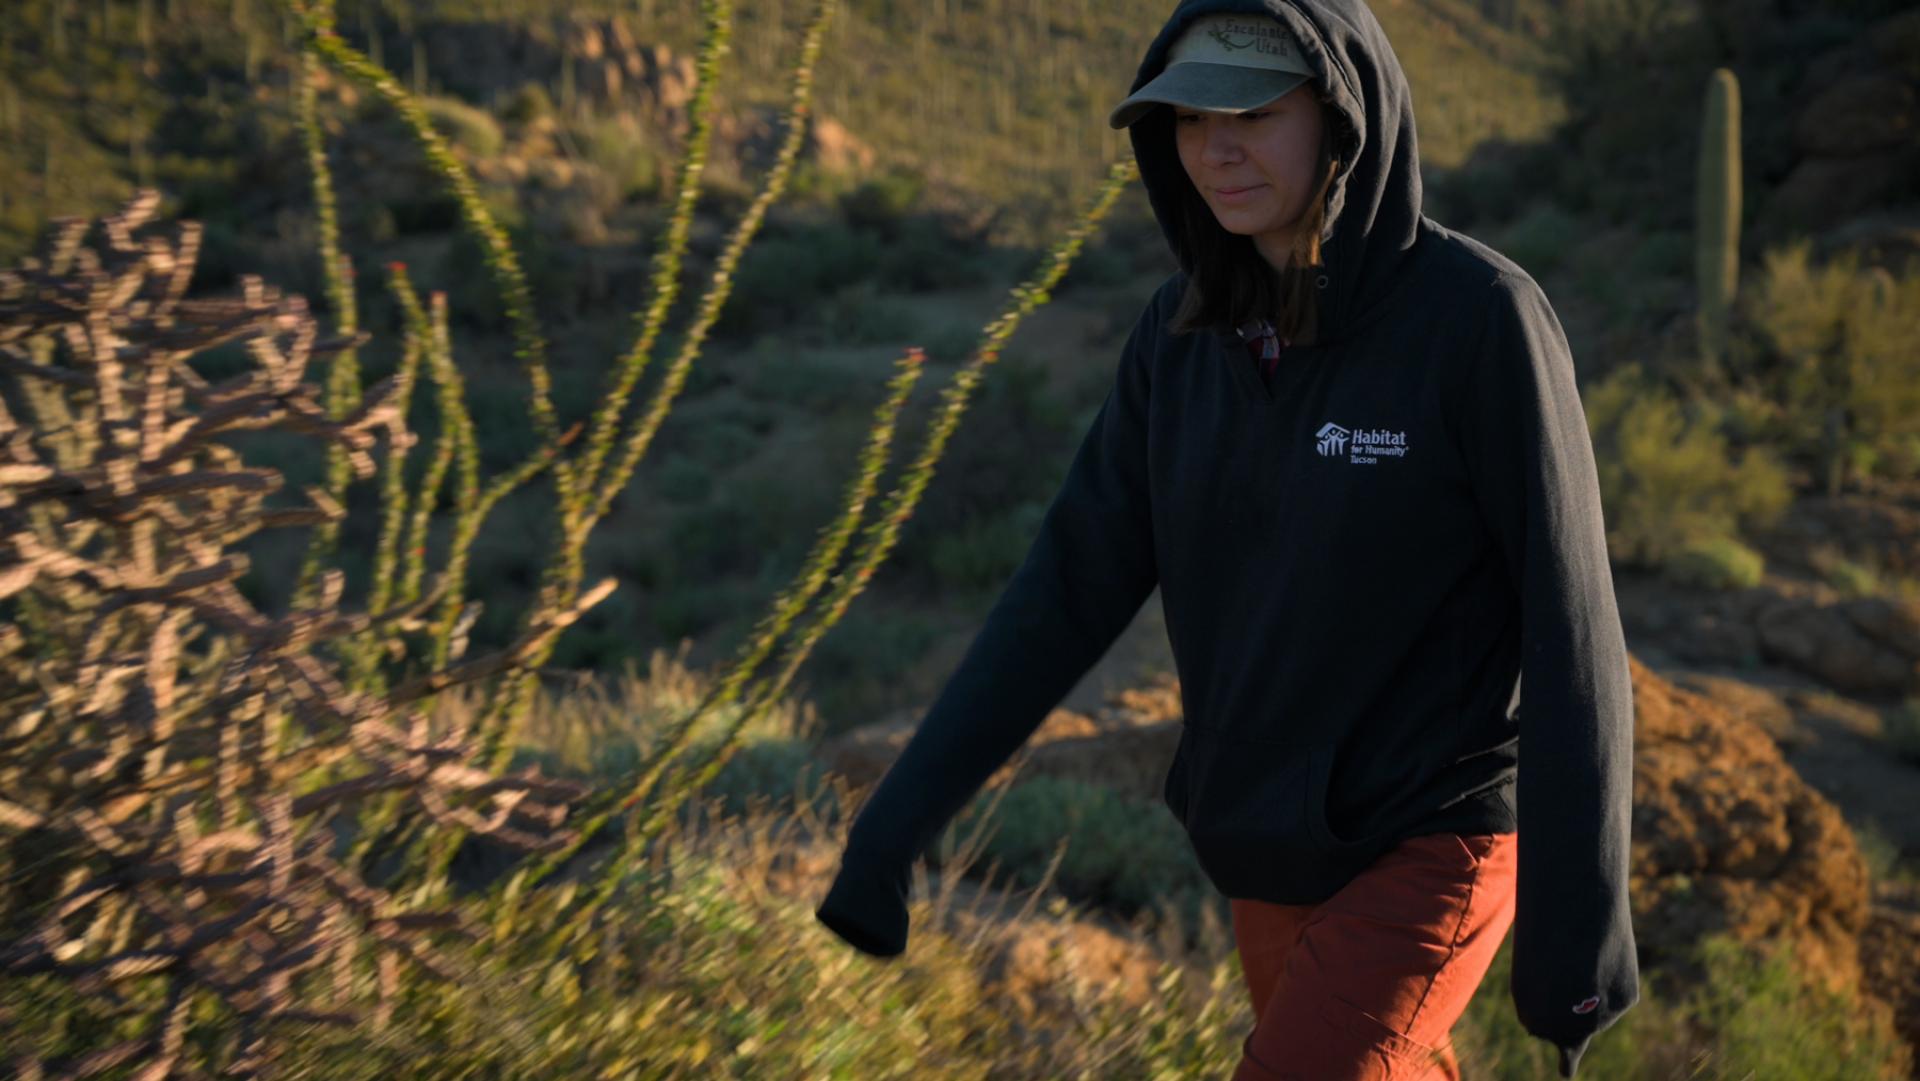 Person walking to the left wearing a dark hooded sweatshirt and baseball cap with desert plants in the background